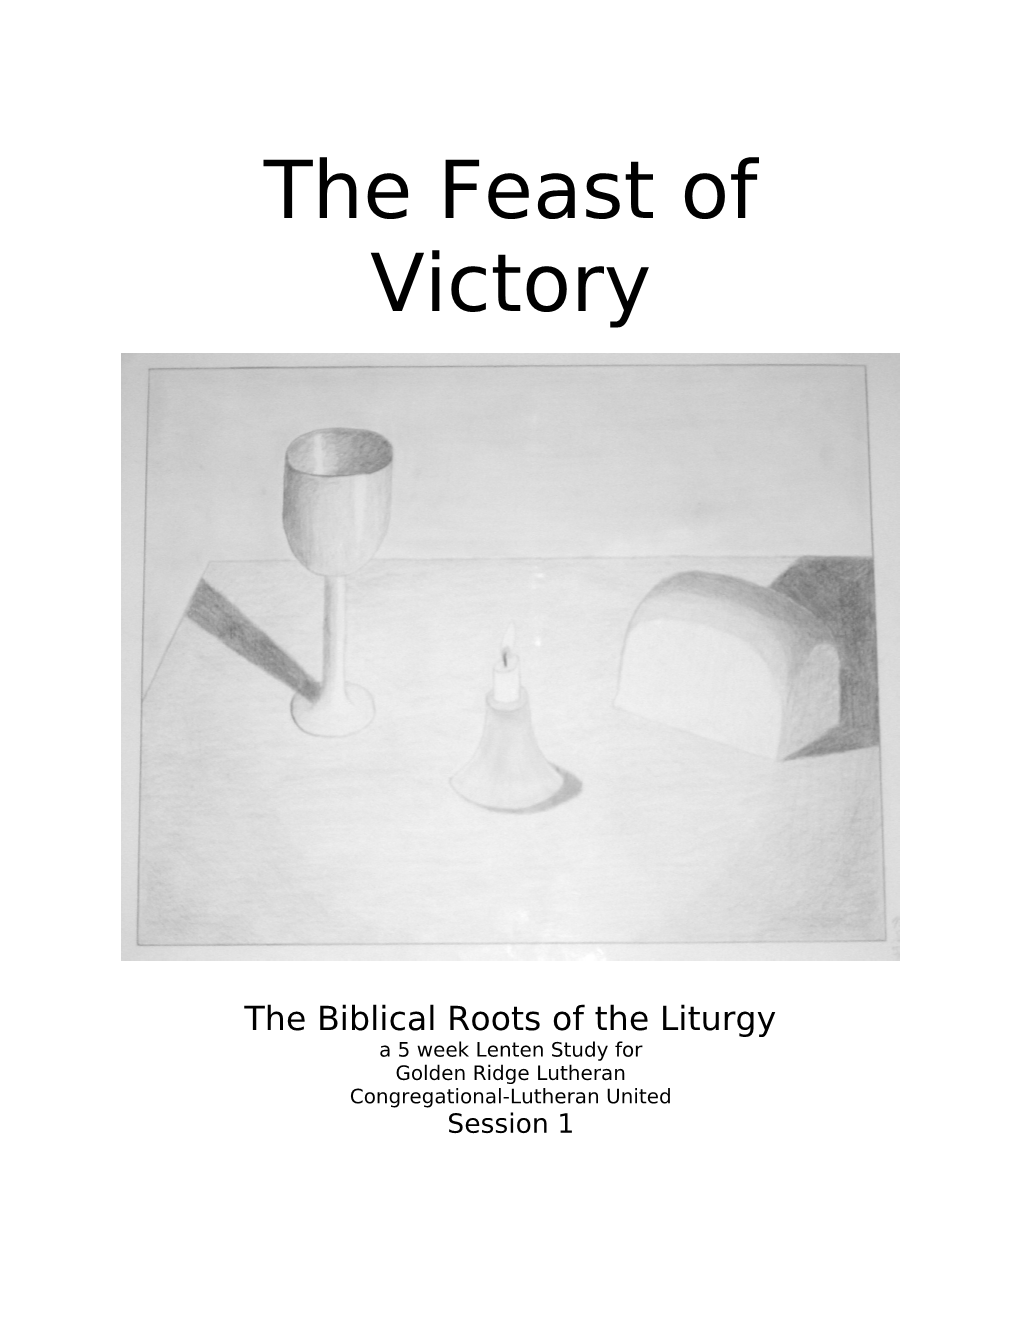 The Biblical Roots of the Liturgy